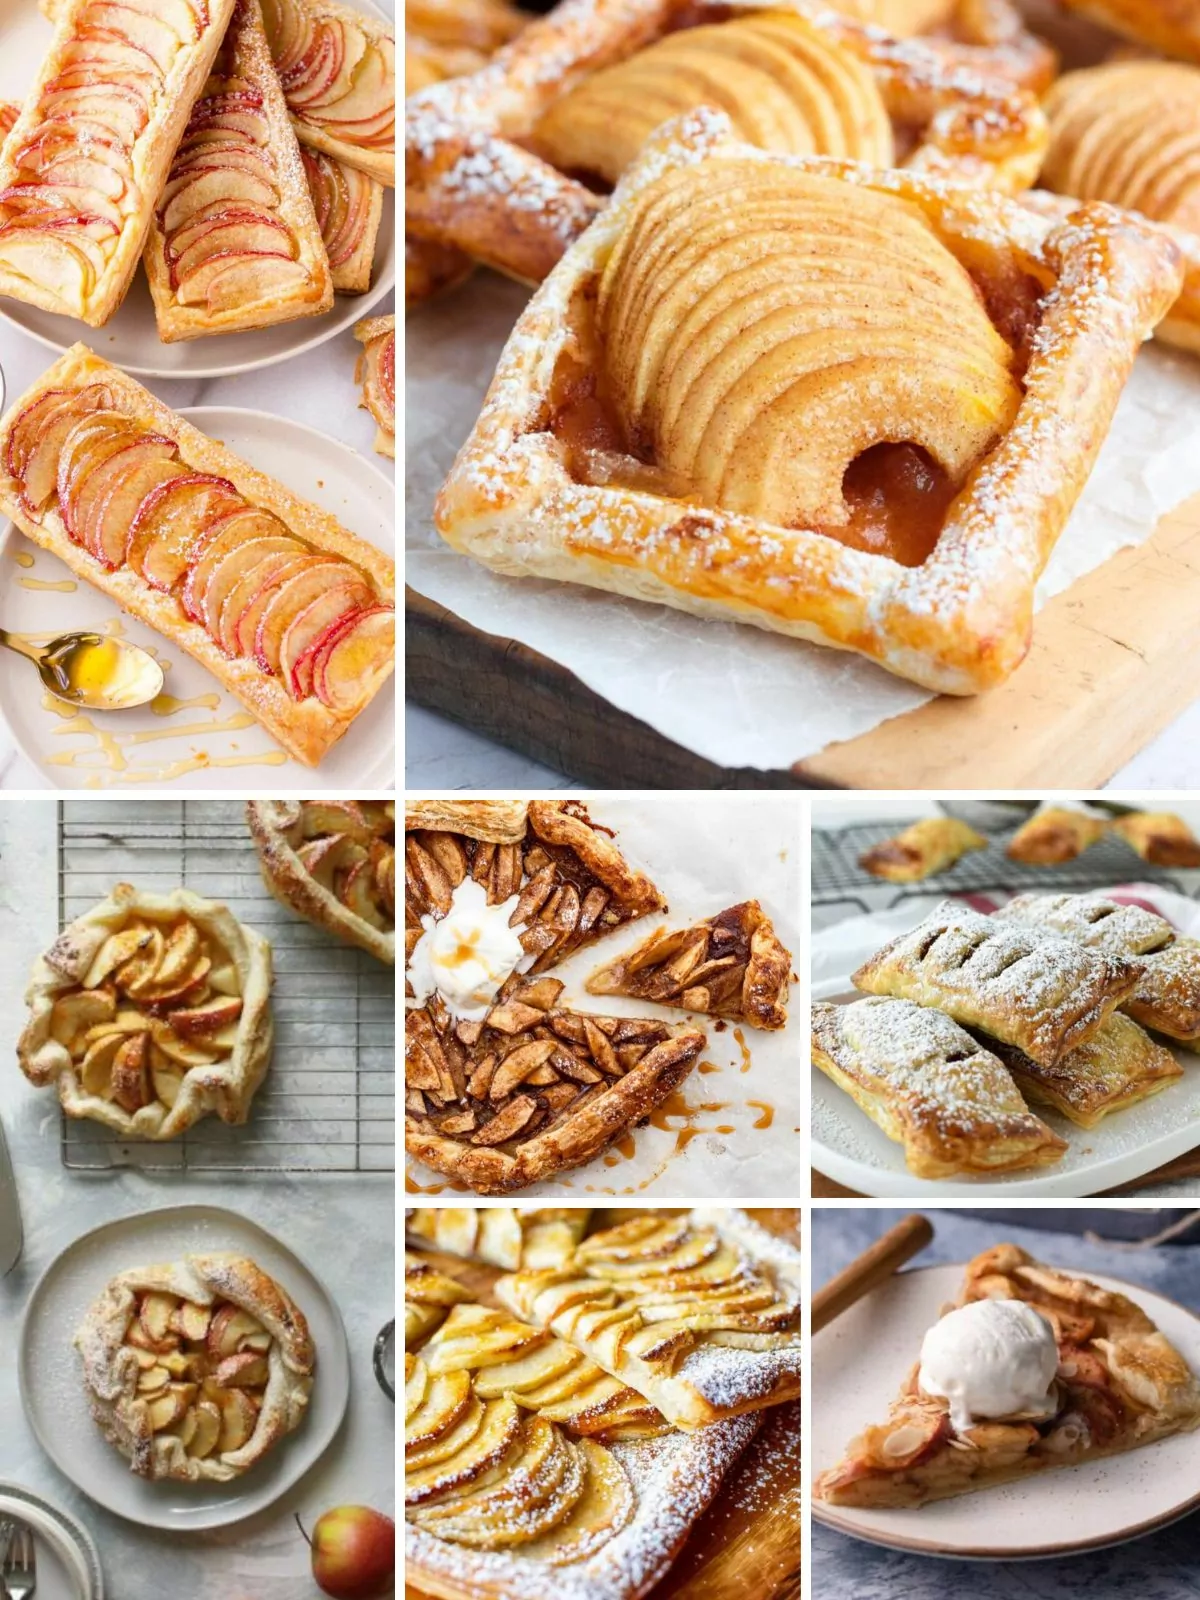 Apple desserts made with puff pastry.